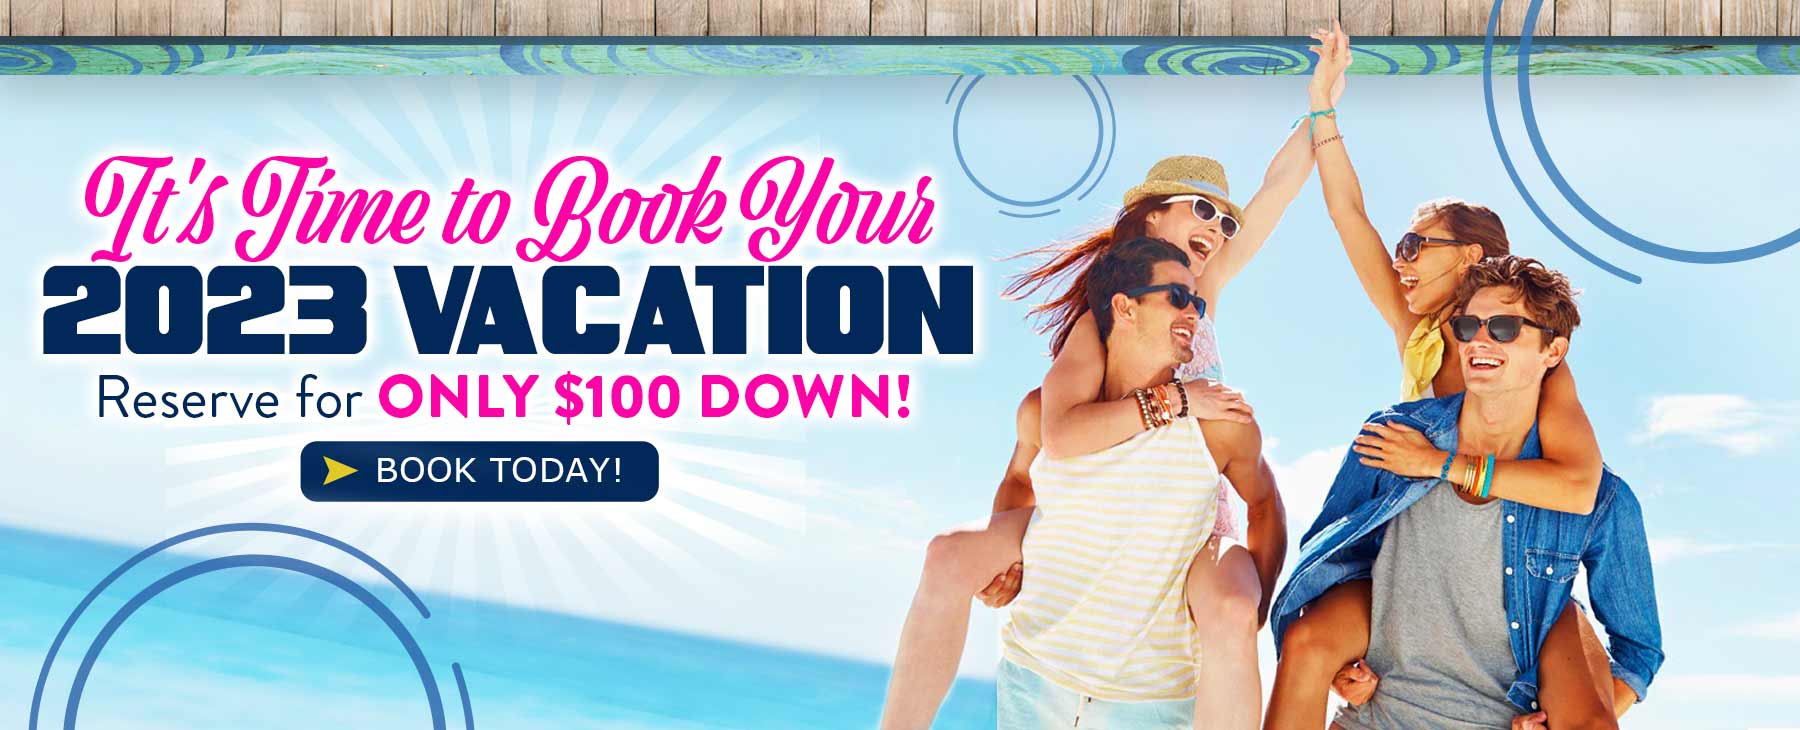 It's Time to Book Your 2023 Vacation. Reserve for ONLY $100 Down!